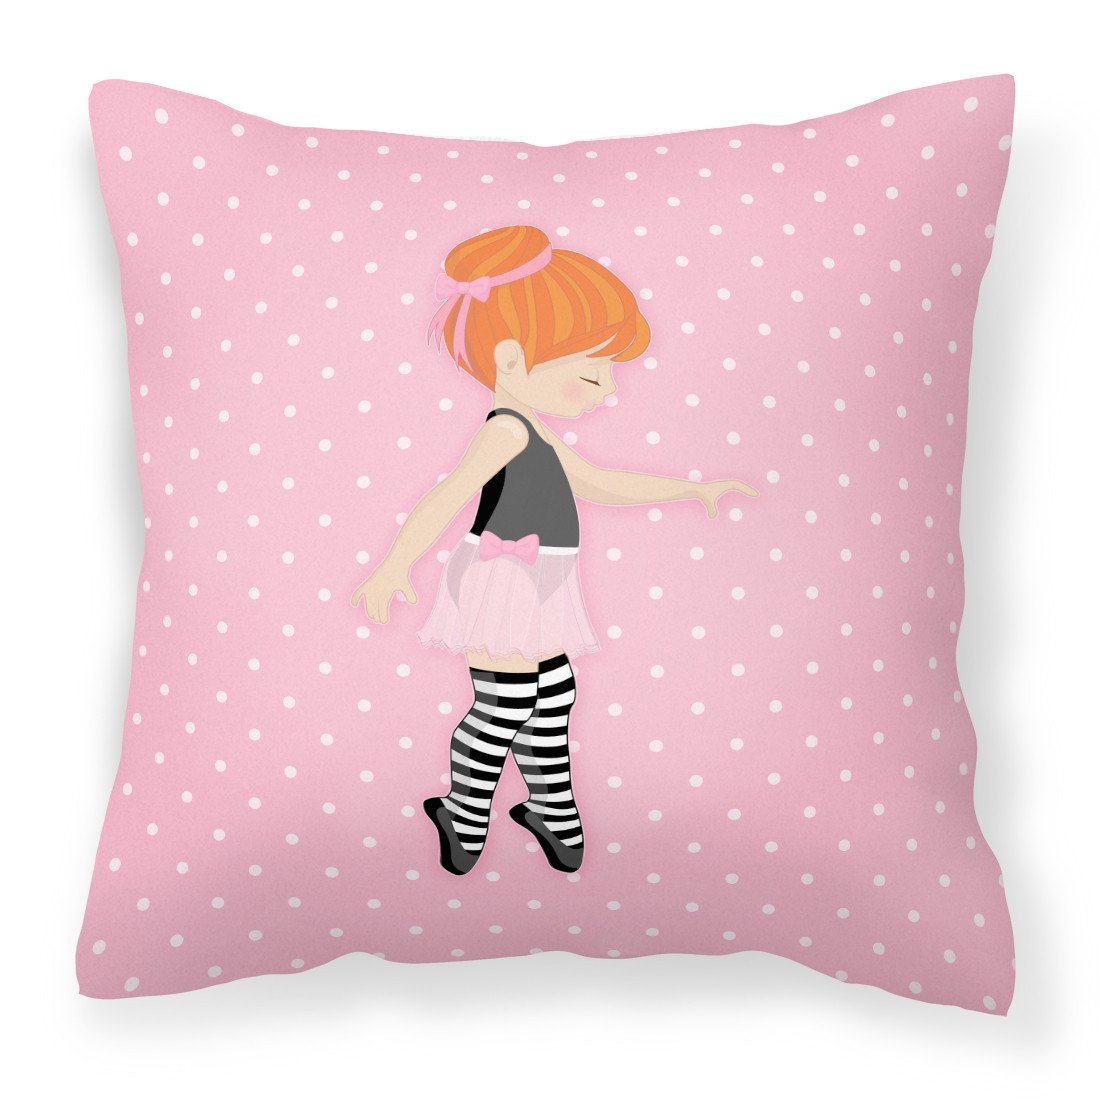 Ballerina Red Head Releve Fabric Decorative Pillow BB5168PW1818 by Caroline's Treasures